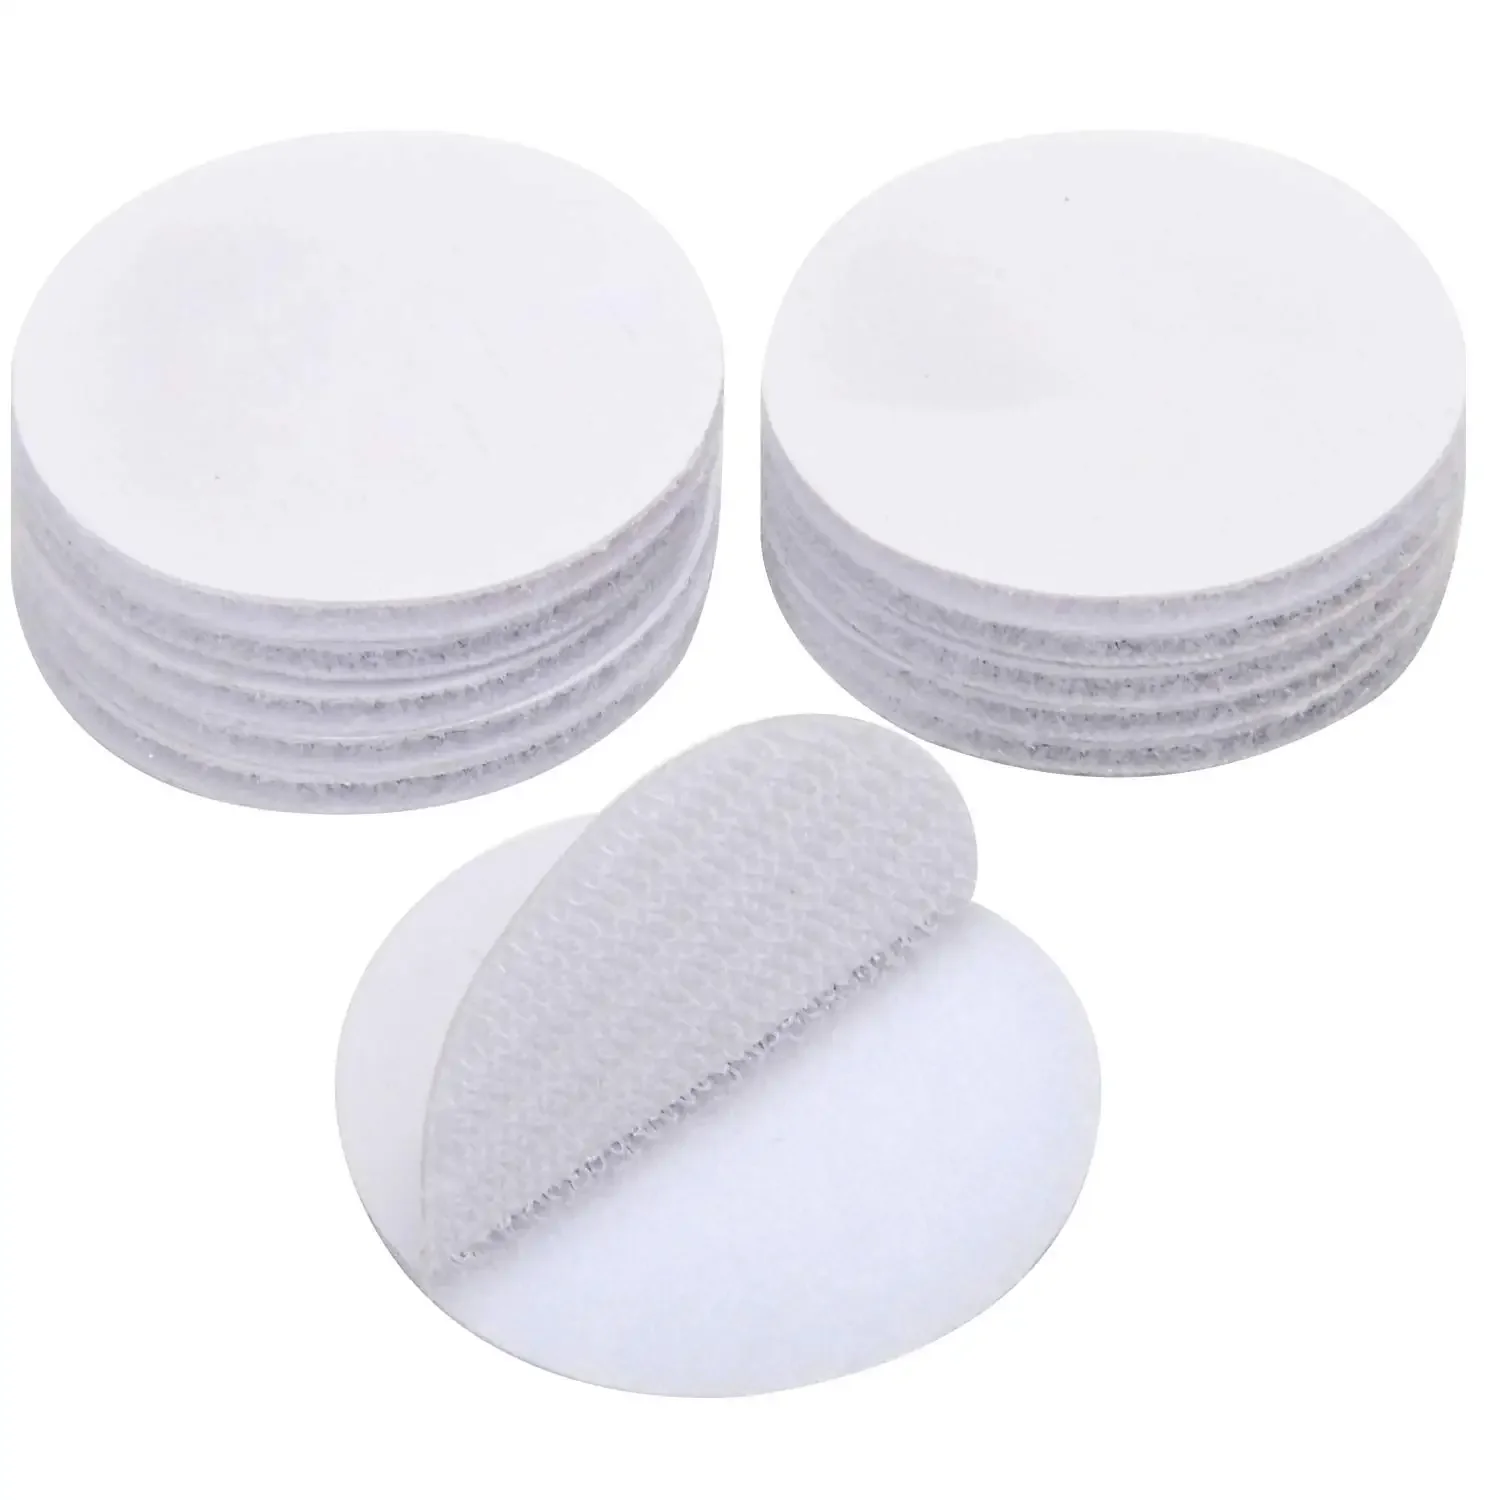 10/20/30Pairs 60mm Round Strong Self Adhesive Fastener Dots Nylon Sticker Double Sided Tape For Sofa Mat Carpet Anti Slip Mat